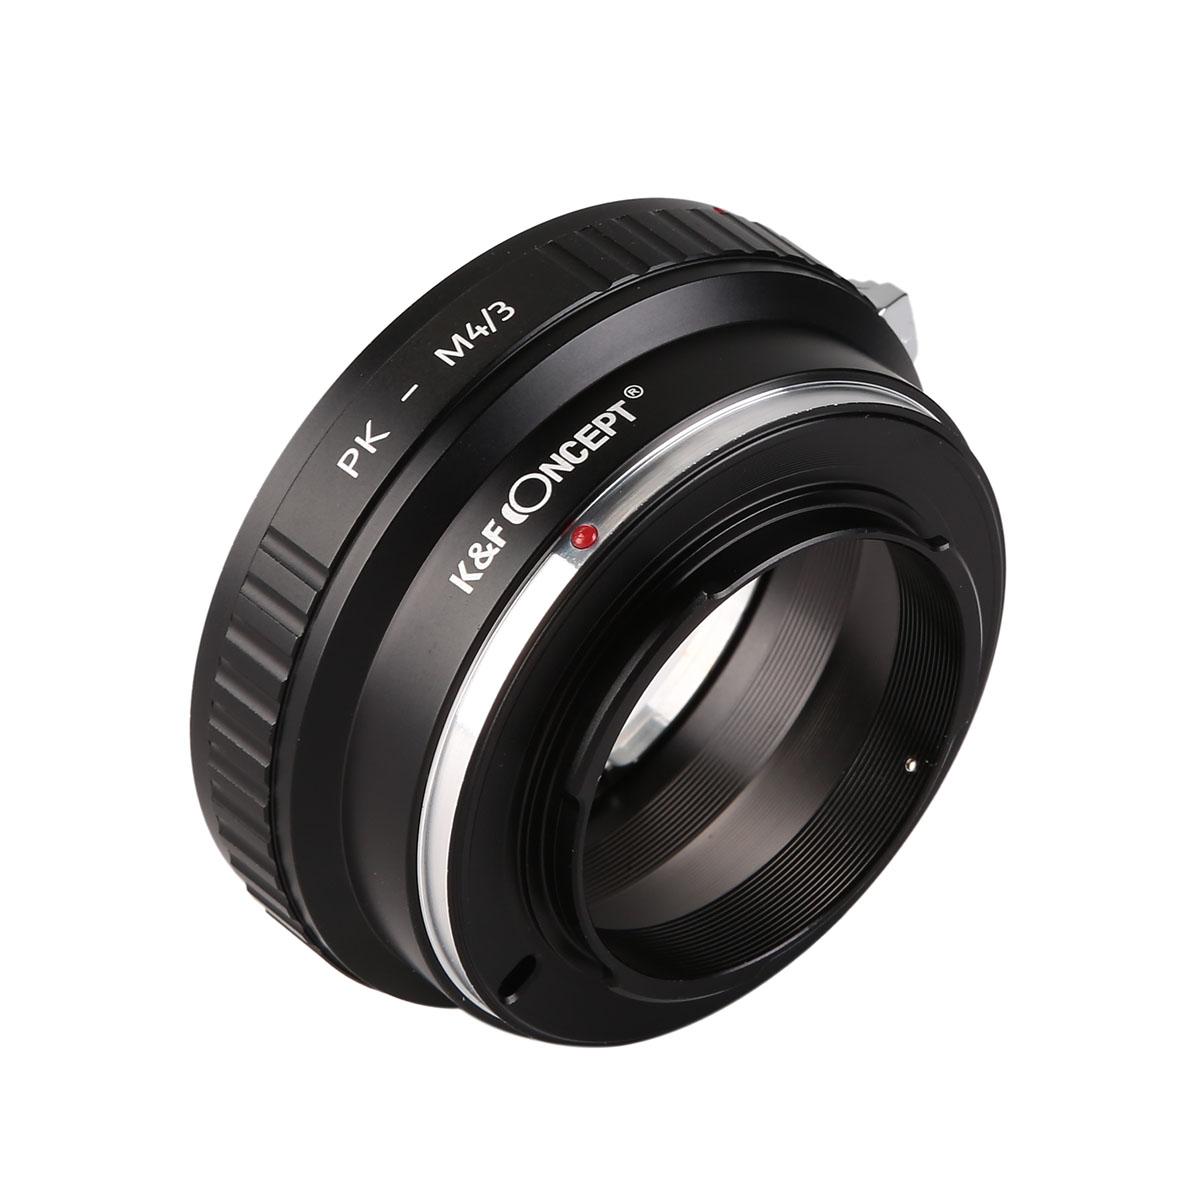 K&F Concept PK to M4/3 Adapter, Lens Mount Adapter Compatible with Pentax PK K Mount Lens to Micro 4/3 M43 MFT Mount Mirrorless Cameras 